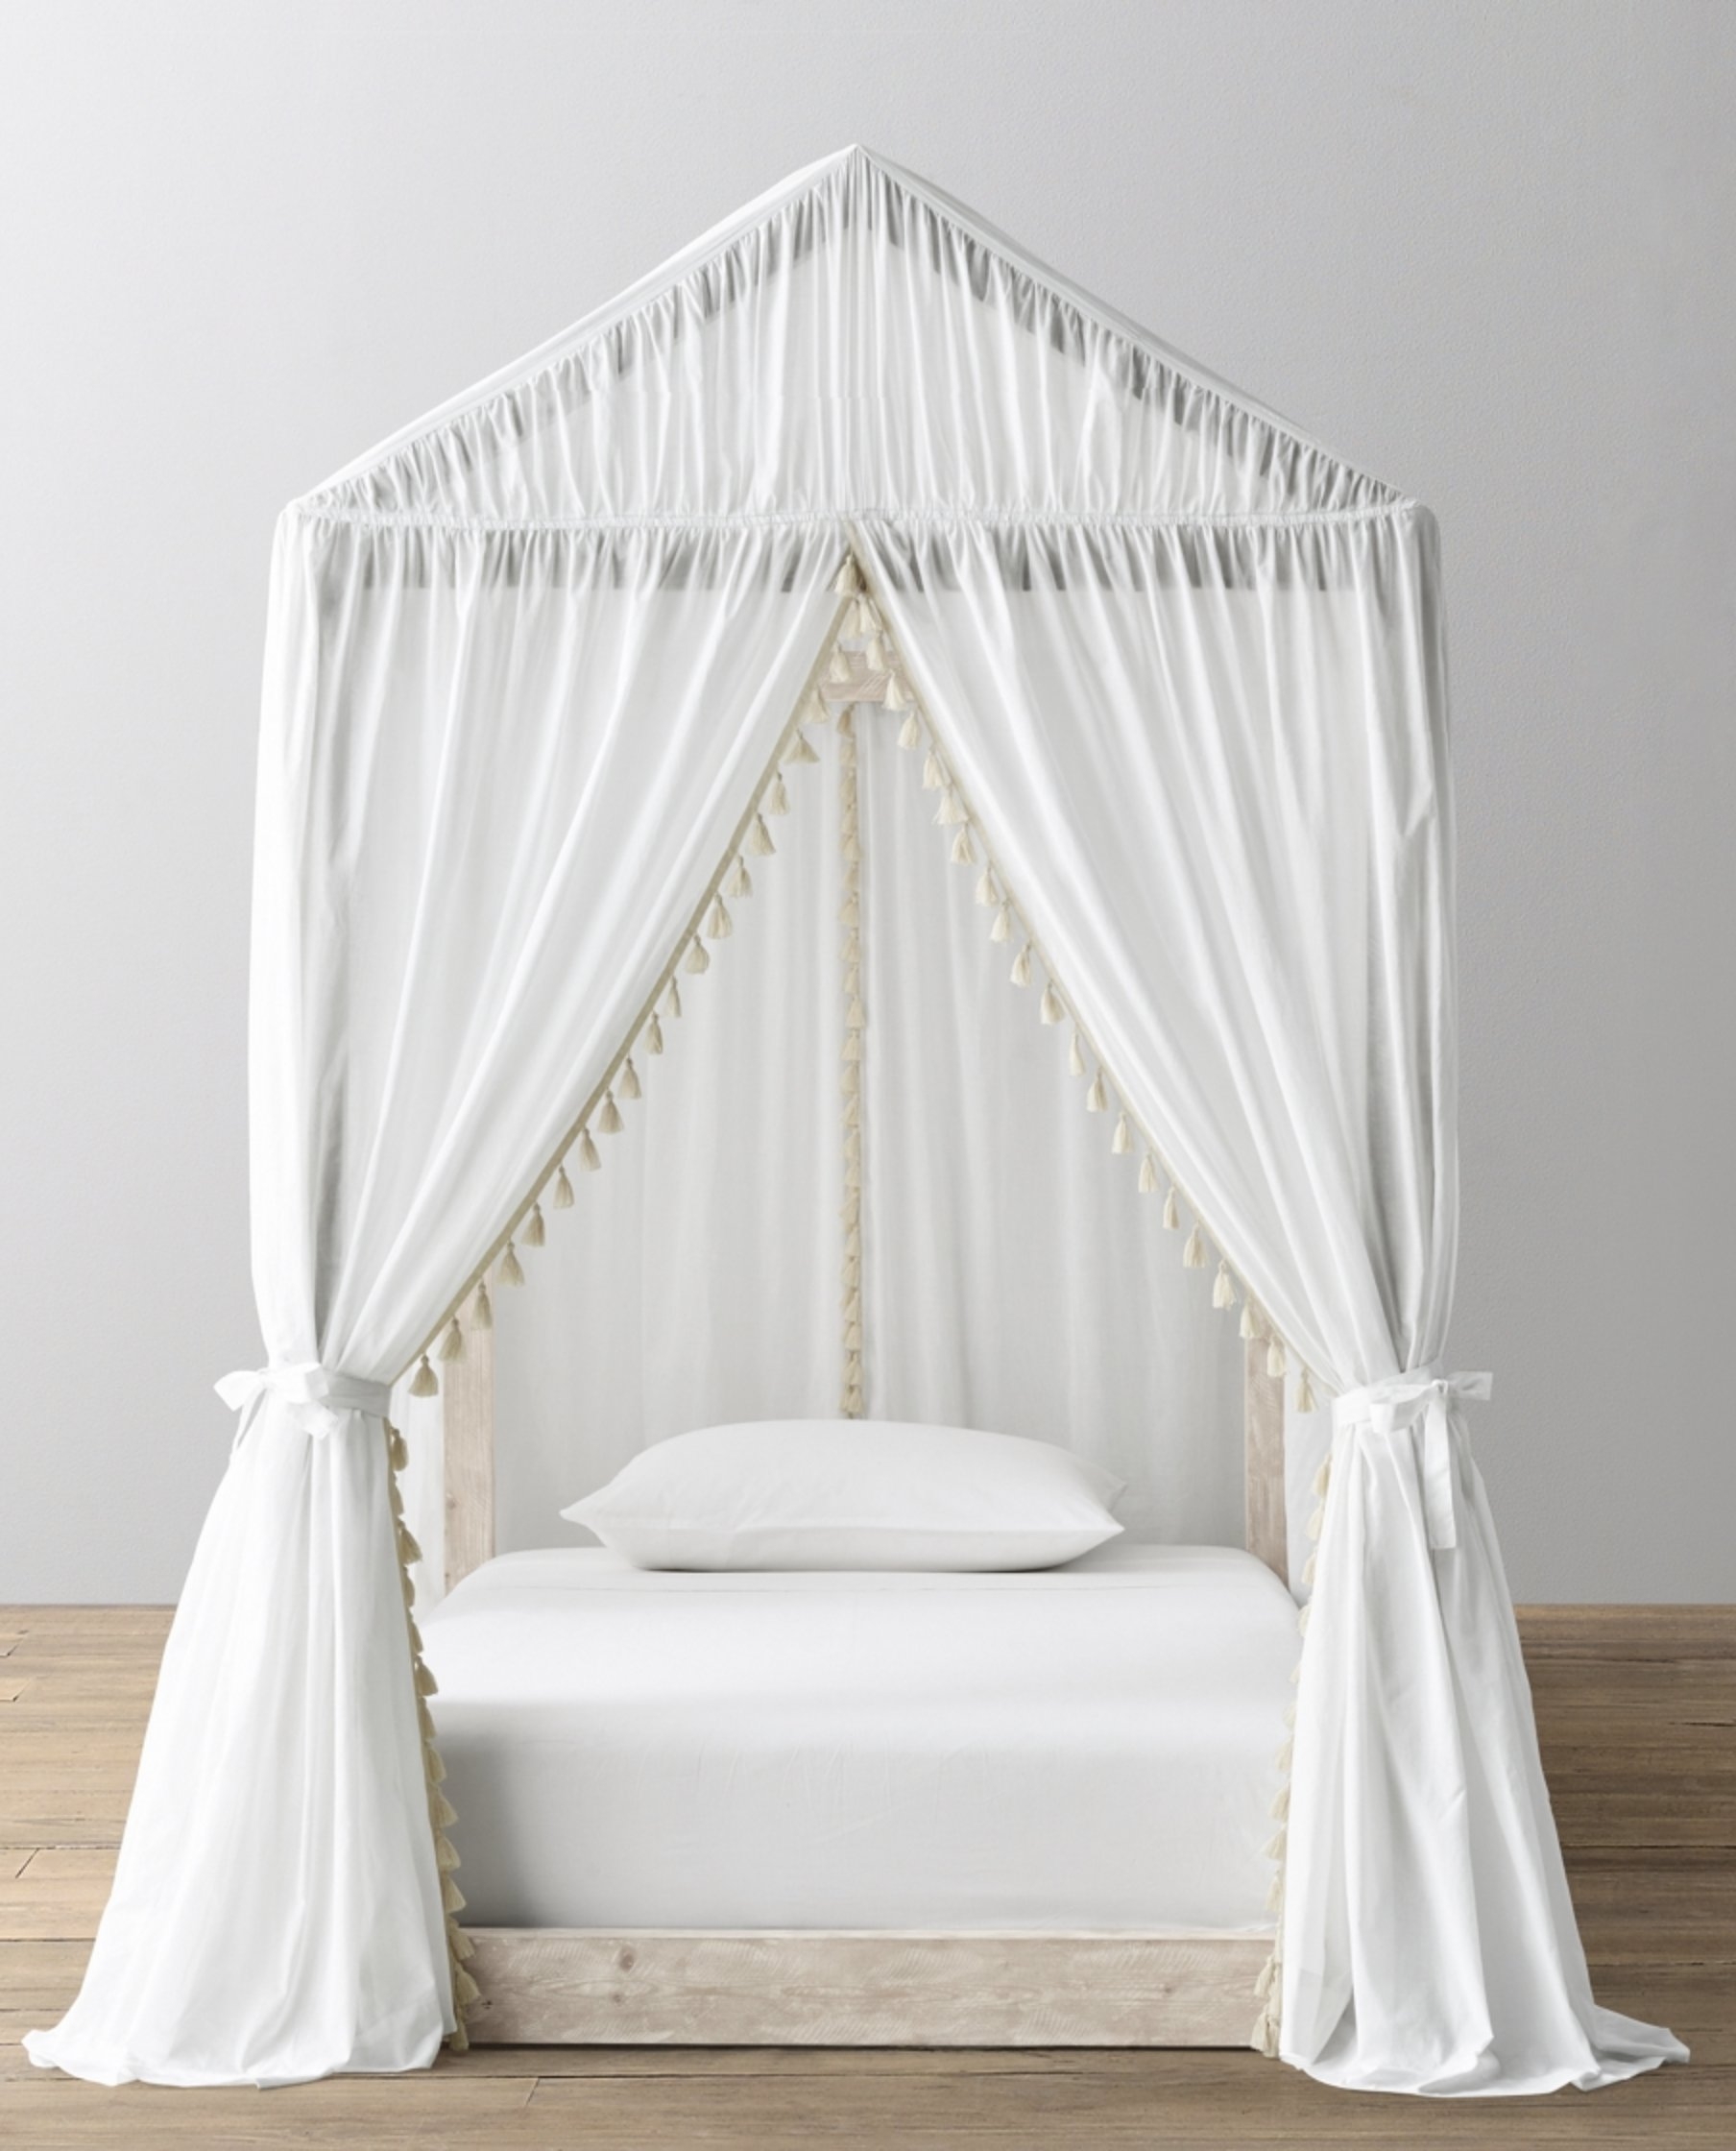 COLE HOUSE PLATFORM BED & TASSEL VOILE CANOPY - NATURAL - WEATHERED WHITE - FULL - Image 0